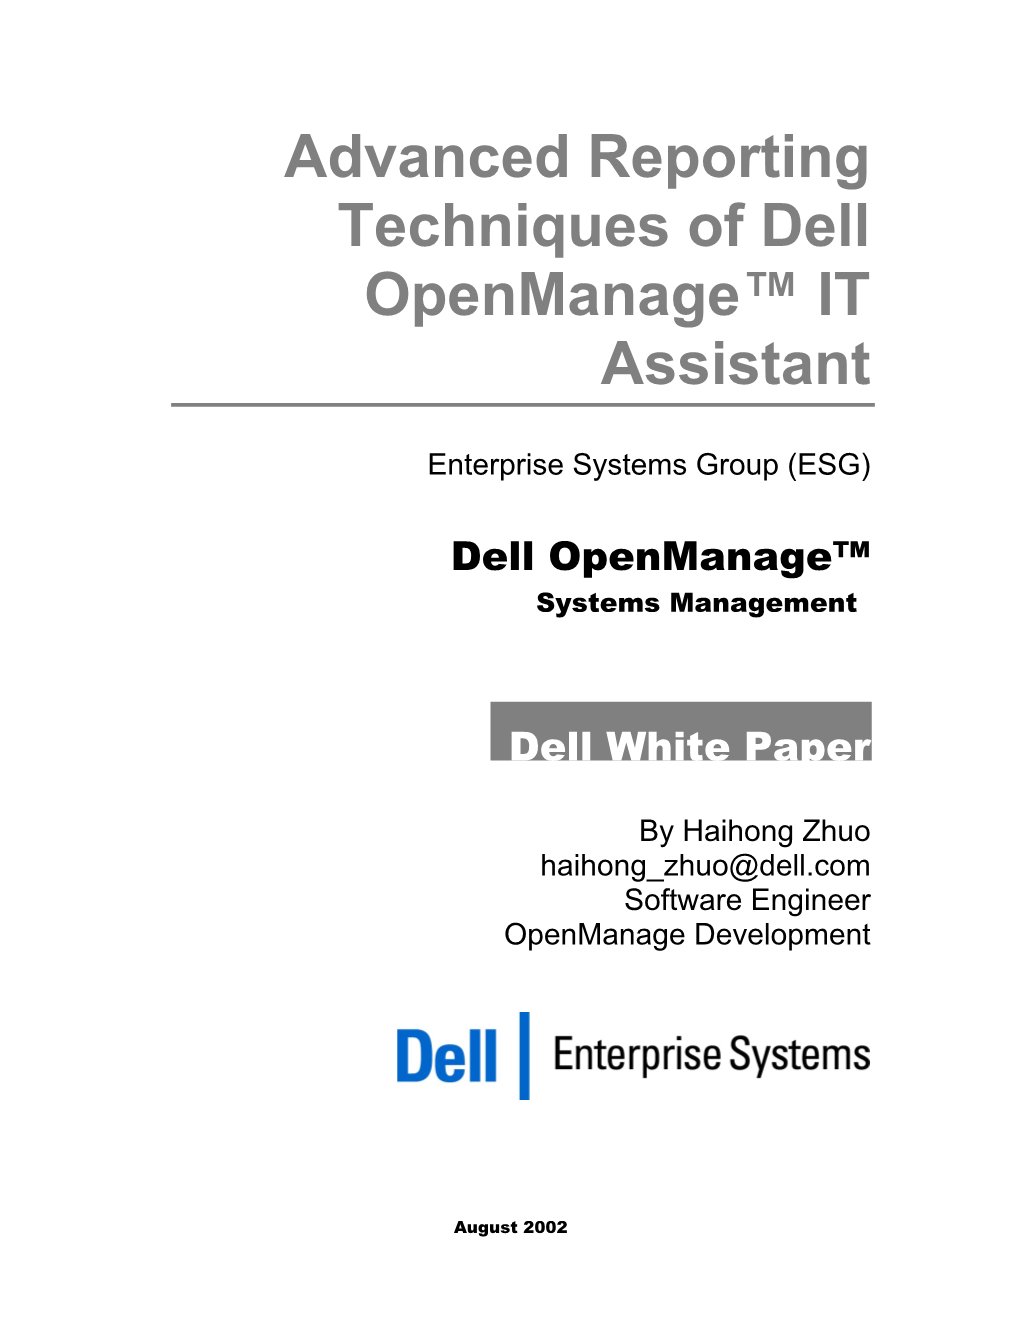 Advanced Reporting Techniques of Dell Openmanage IT Assistant